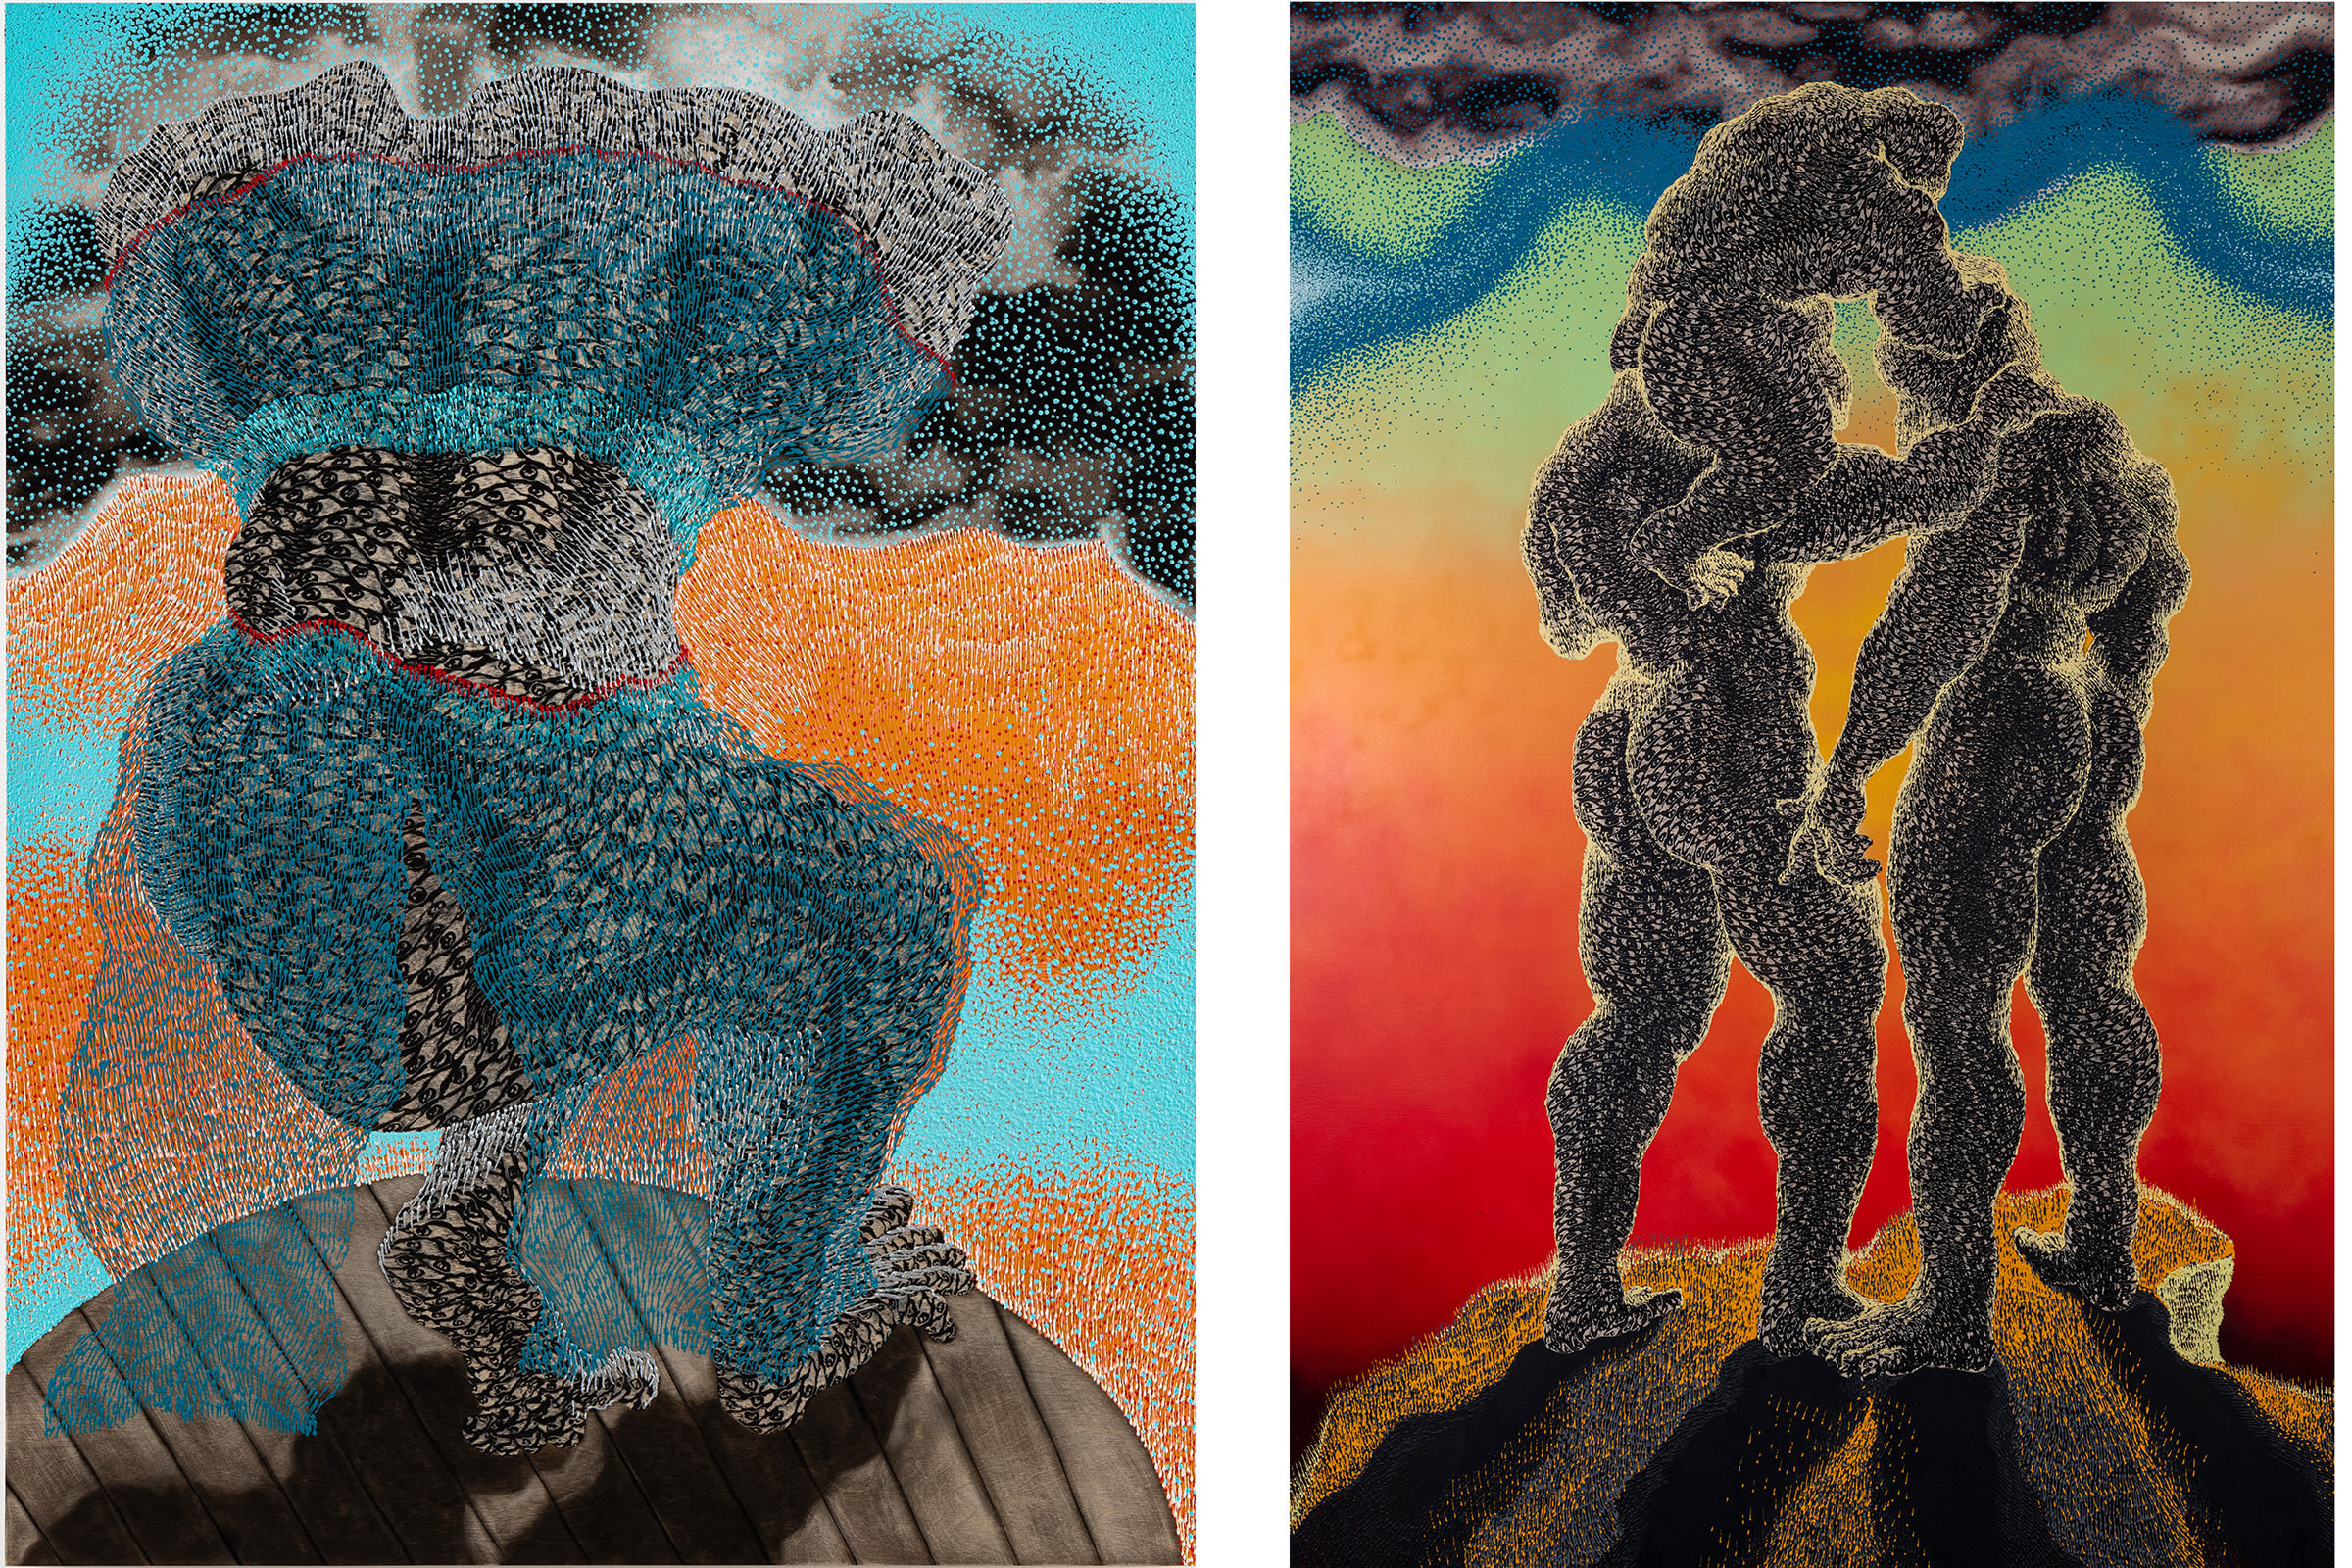 Left: Didier William, Gwo Madame, 2020. Braiteh Foundation Collection. Right: Didier William, Just Us Three, 2021. Collection of Jonathan Sobel and Marcia Dunn.